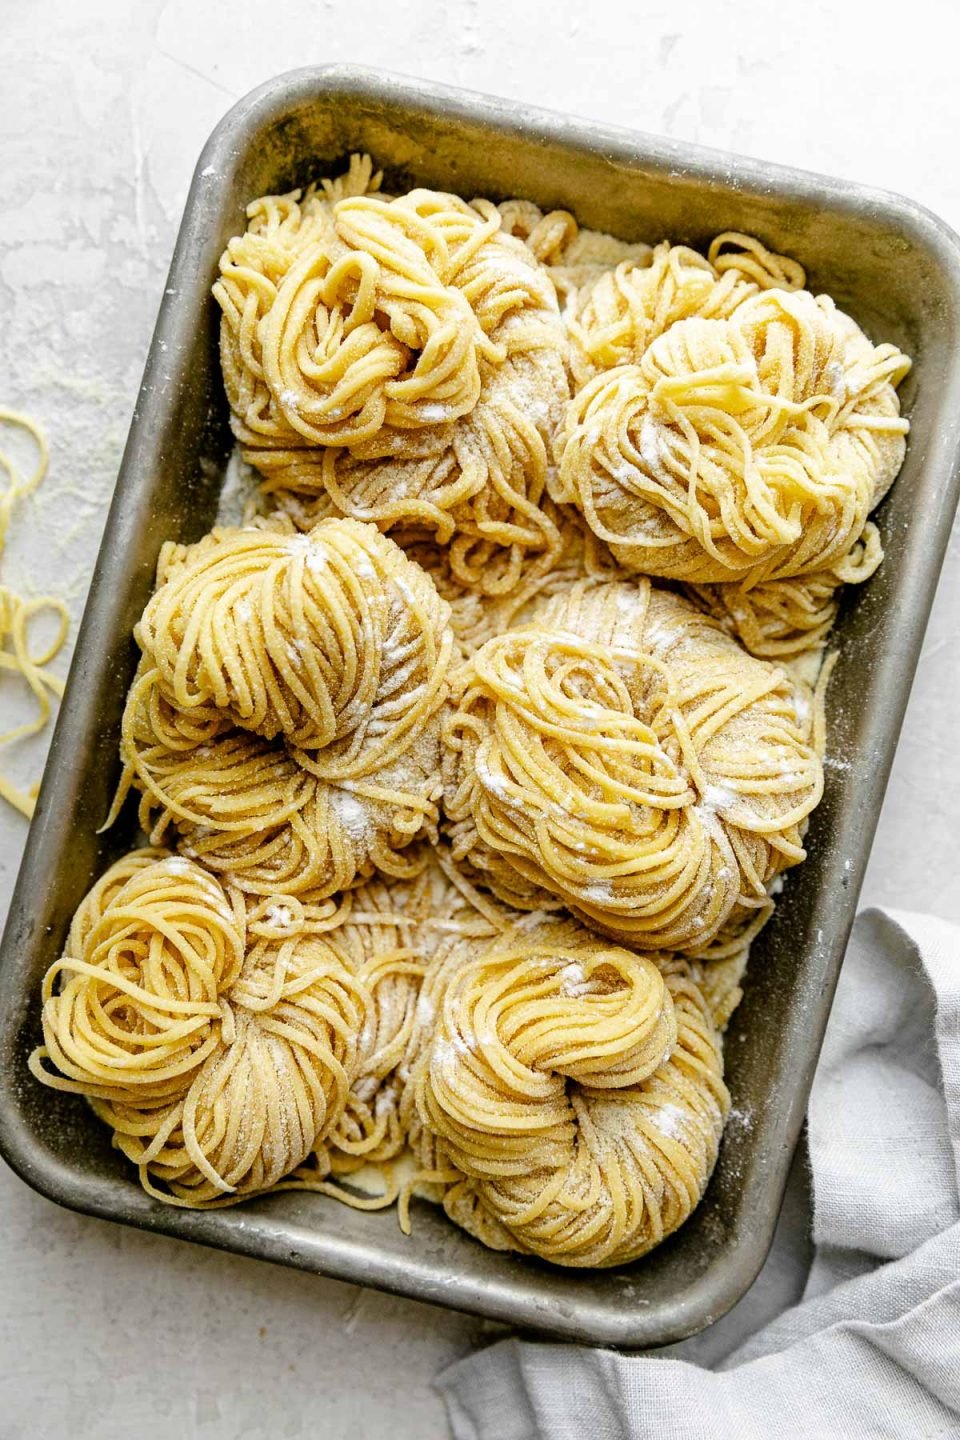 Six bundles of fresh pasta cut into spaghetti noodles are arranged on a small aluminum baking sheet and dusted with semolina flour. The baking sheet sits atop a white textured surface. A light blue napkin & a few stray noodles surround the baking sheet.